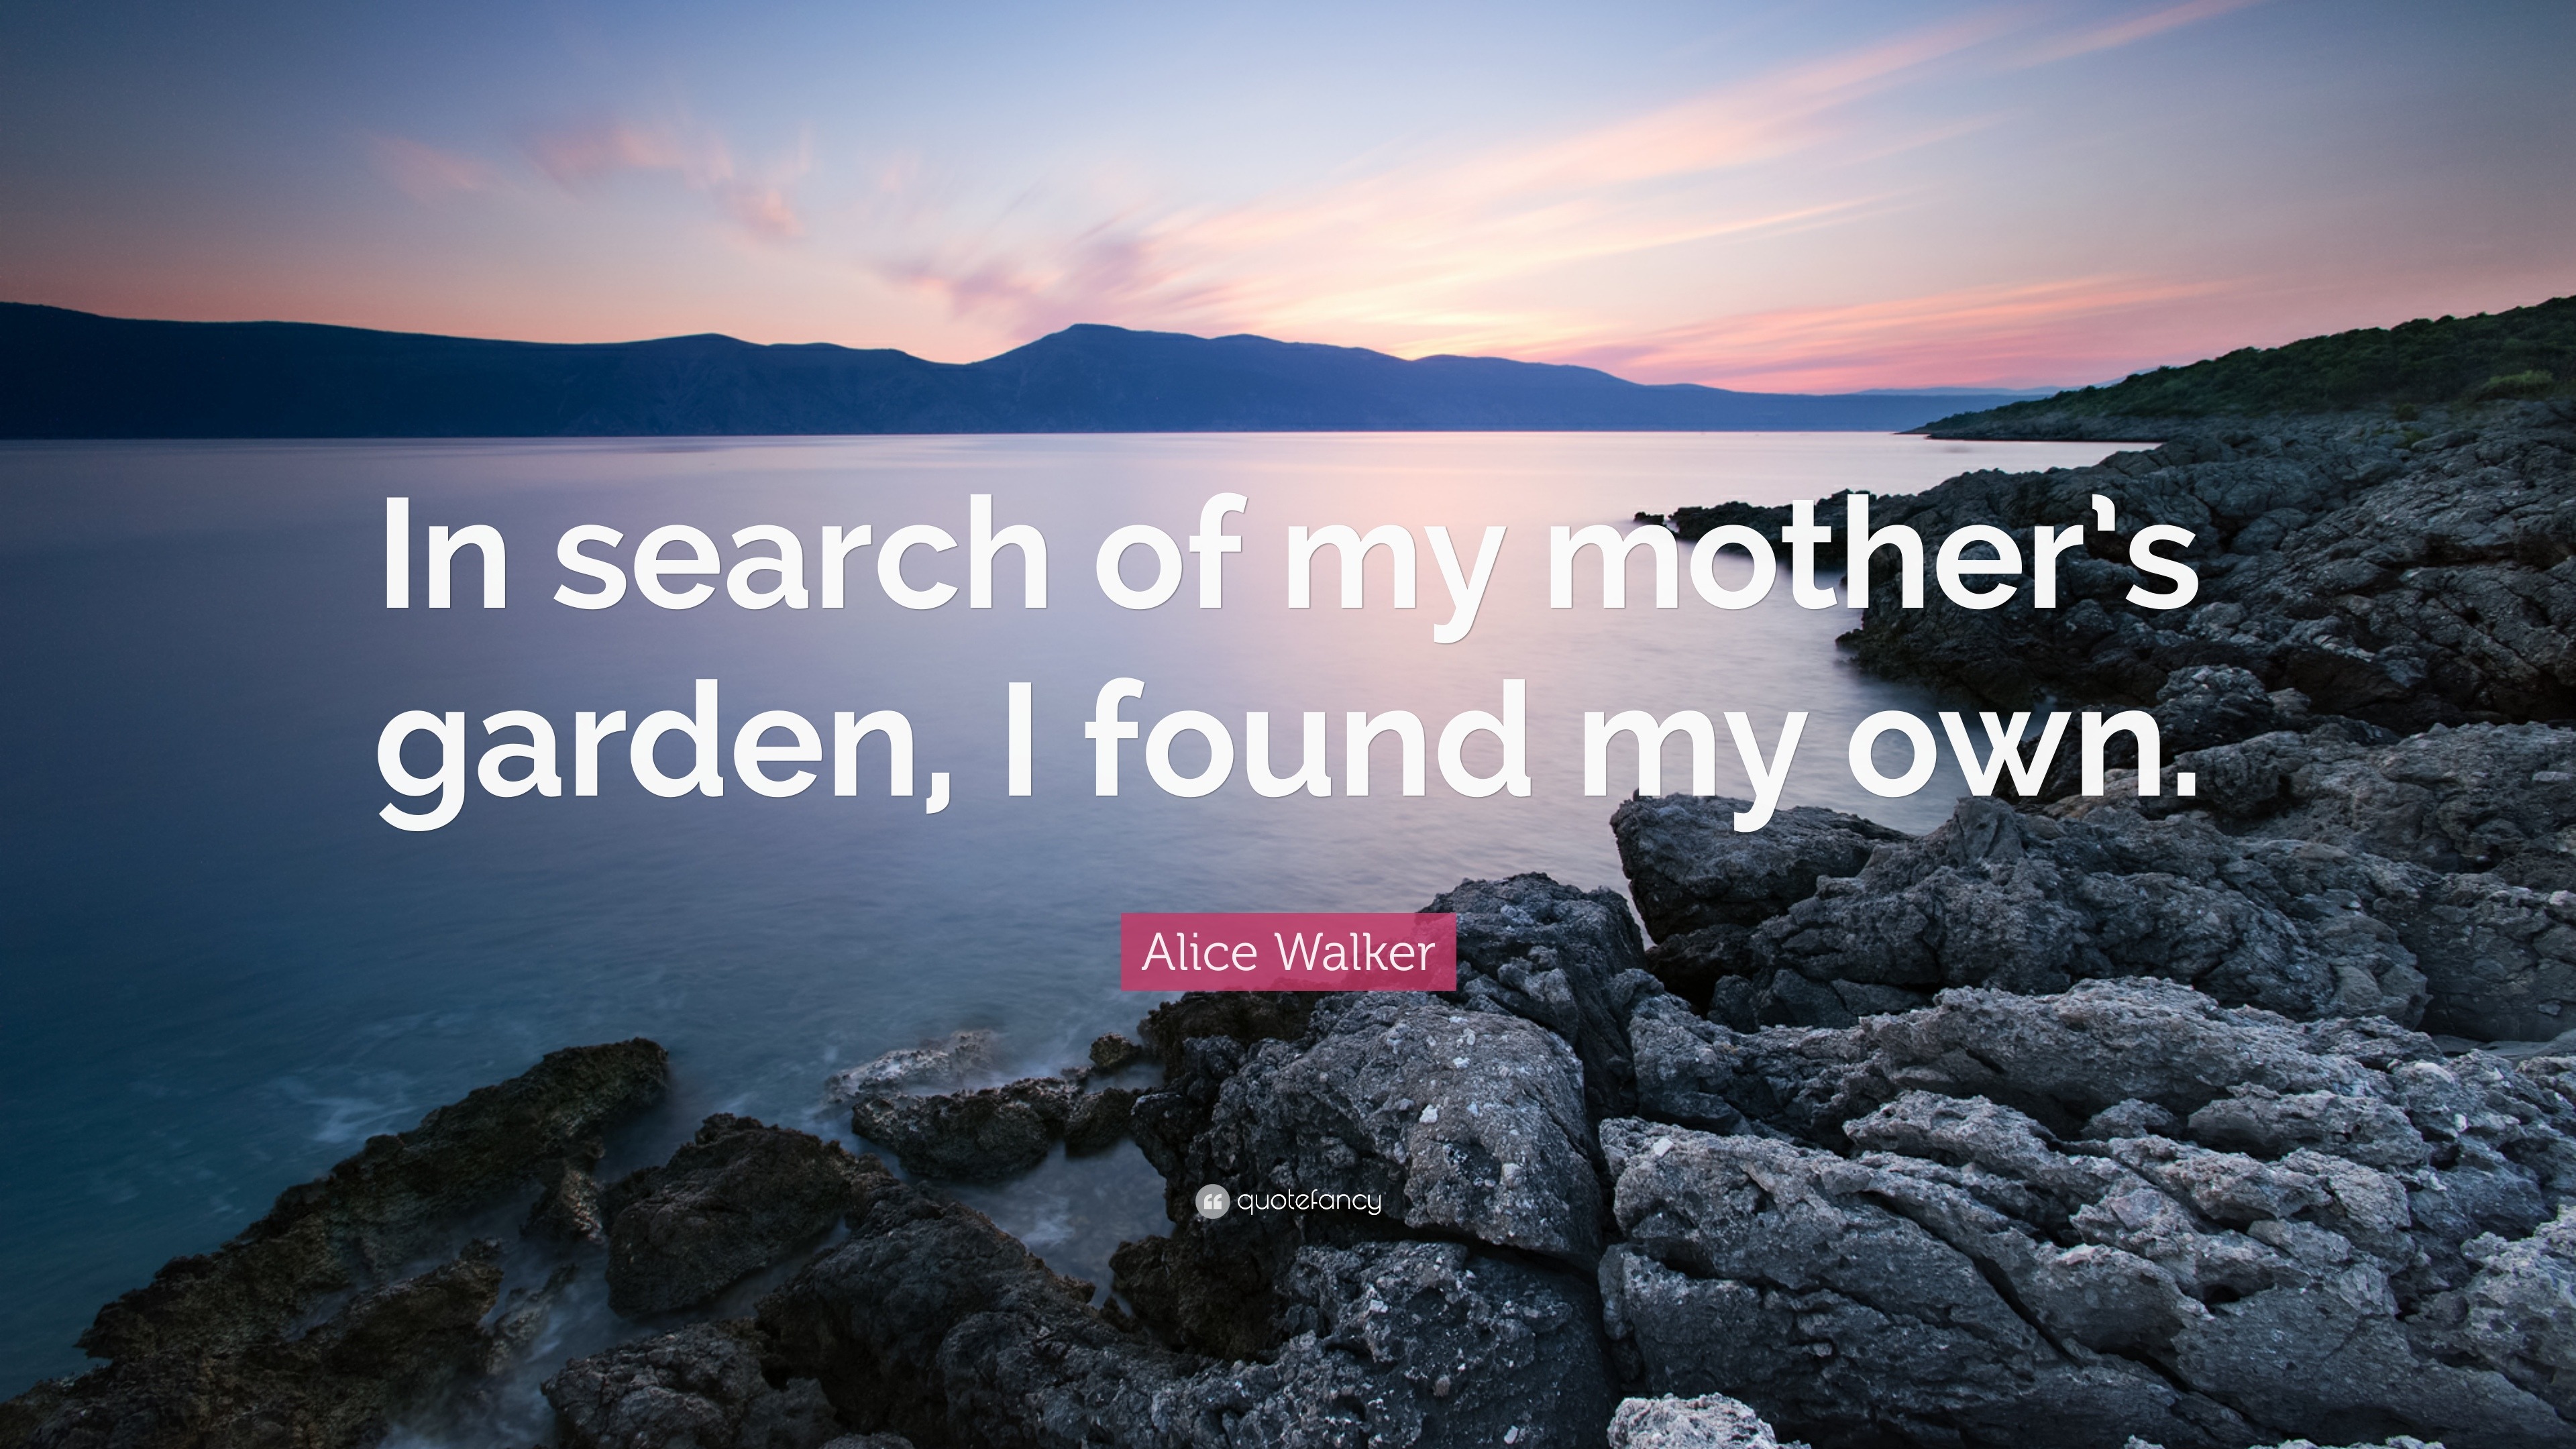 Alice Walker - In search of my mother's garden, I found my